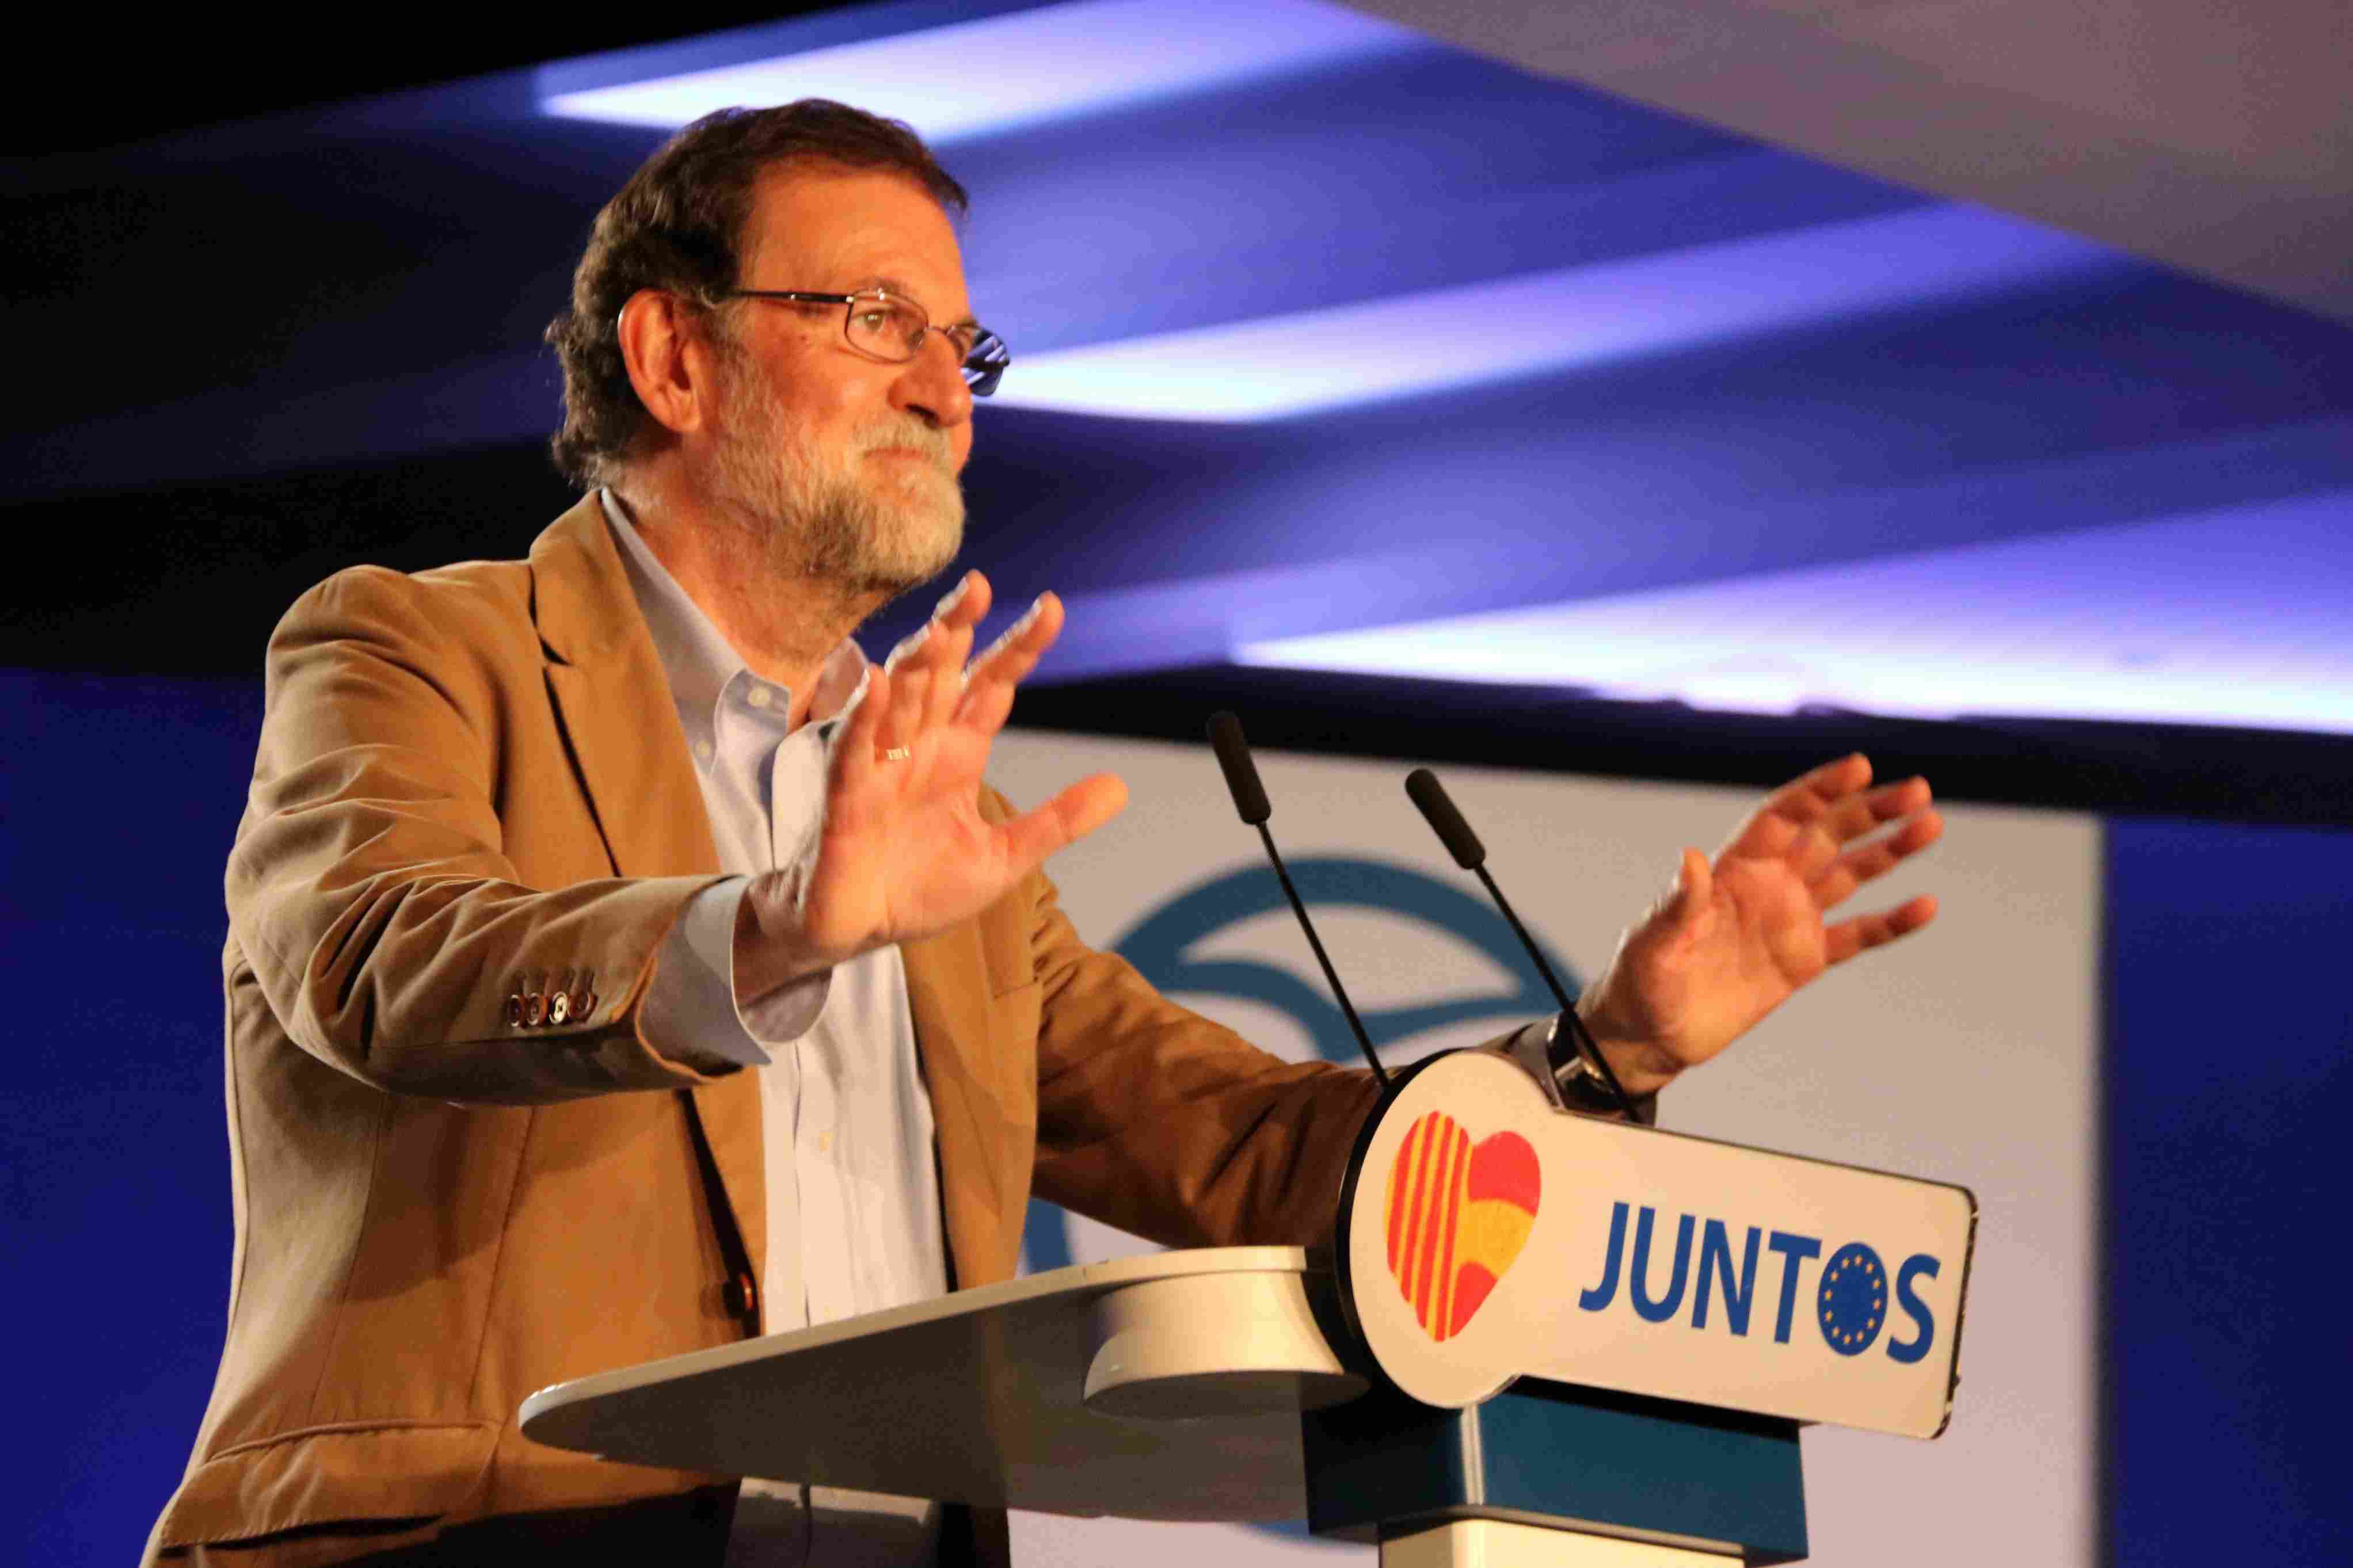 Rajoy boasts about article 155: "We have restored the legal and democratic order"